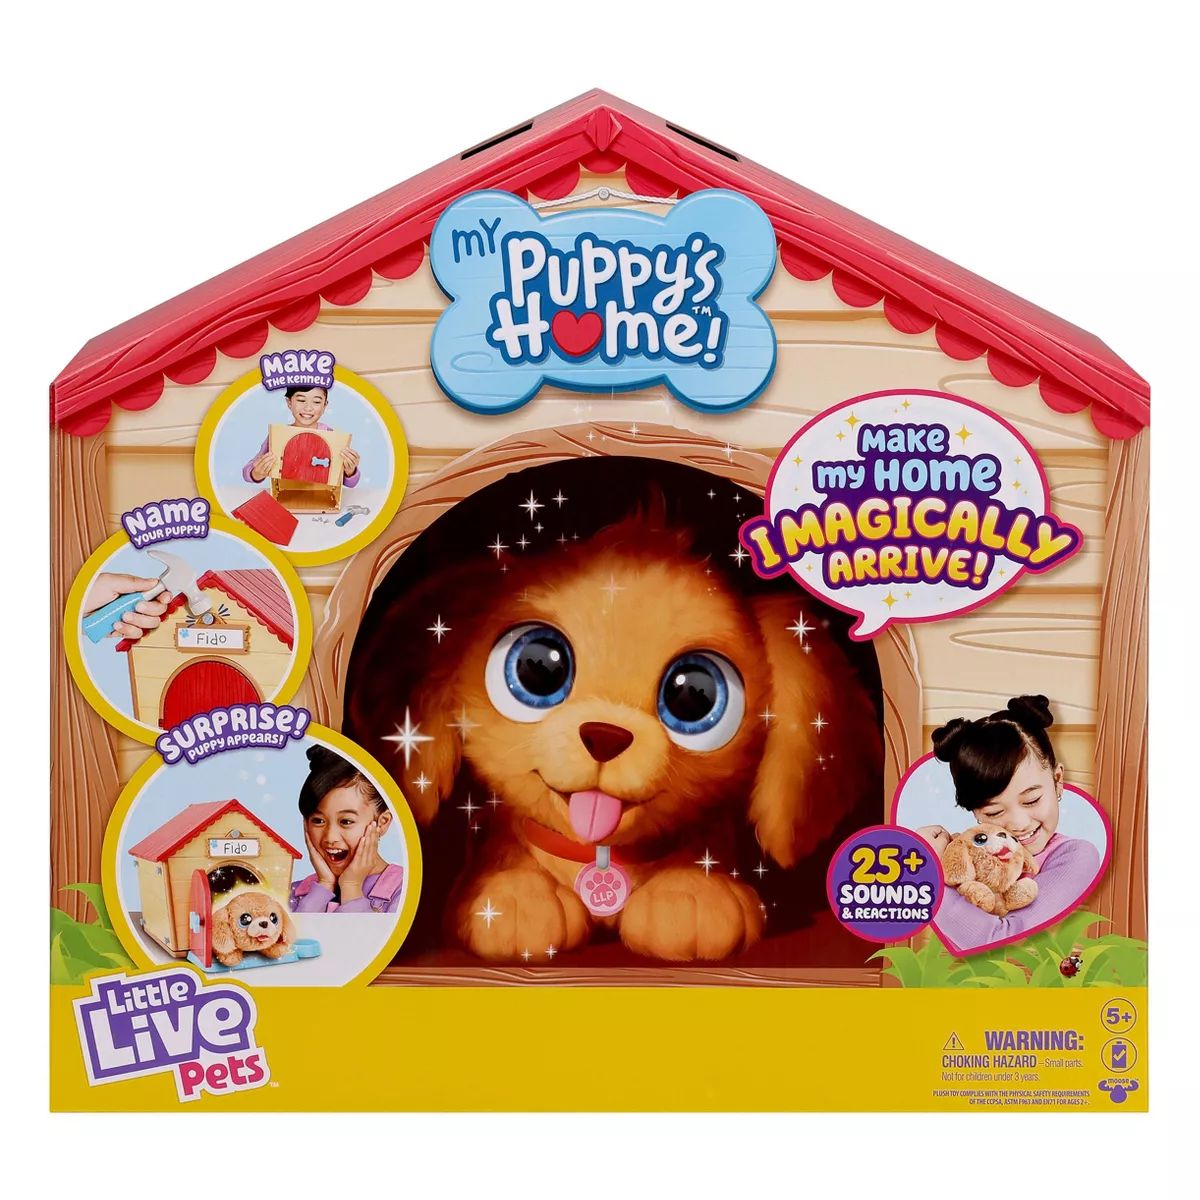 Little Live Pets My Puppy's Home | Target